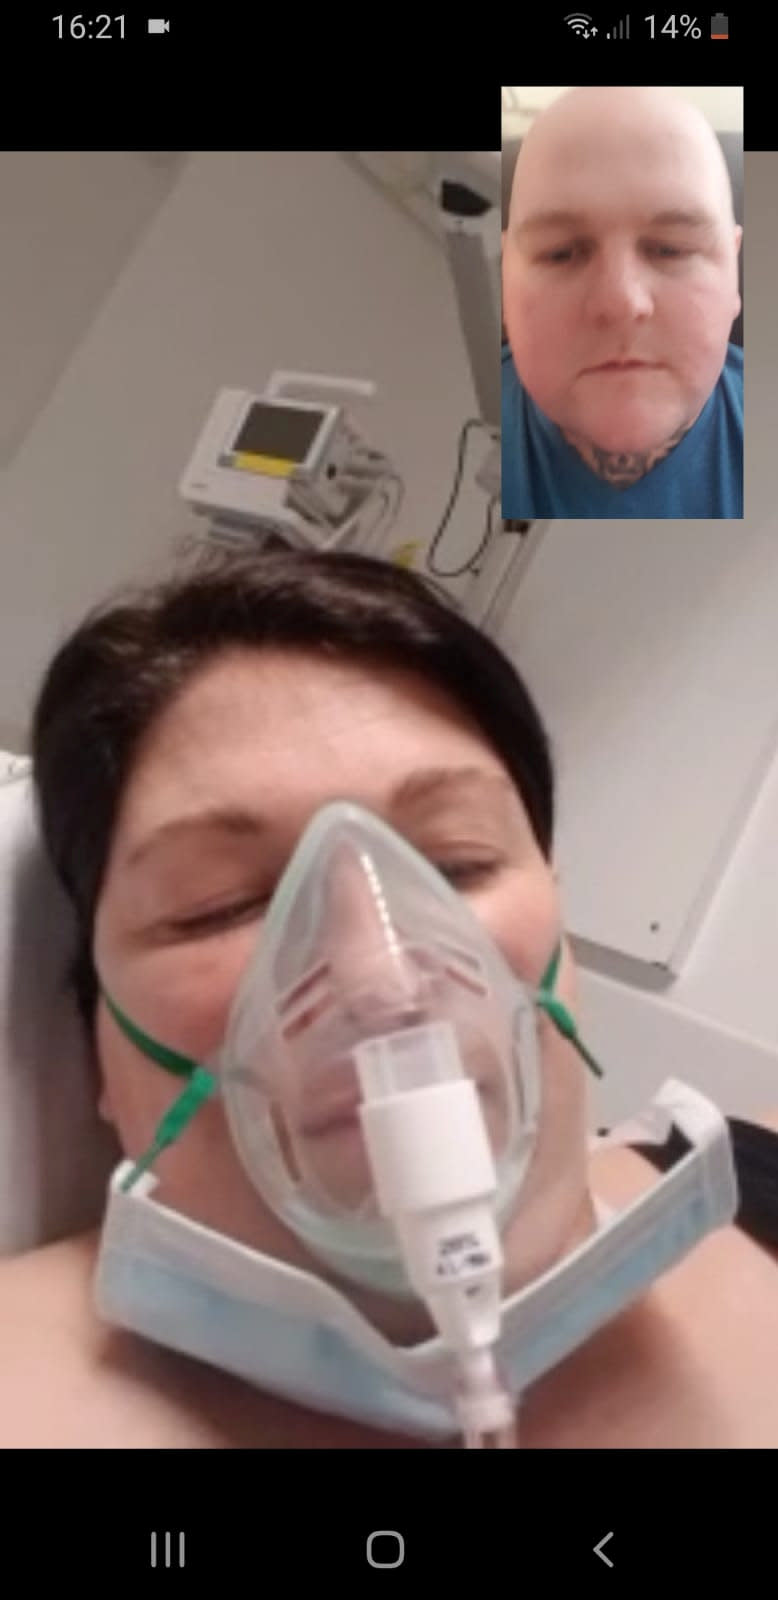 Danielle was in an induced coma for 10 days while pregnant with the twins, pictured here face-timing her partner. (SWNS)